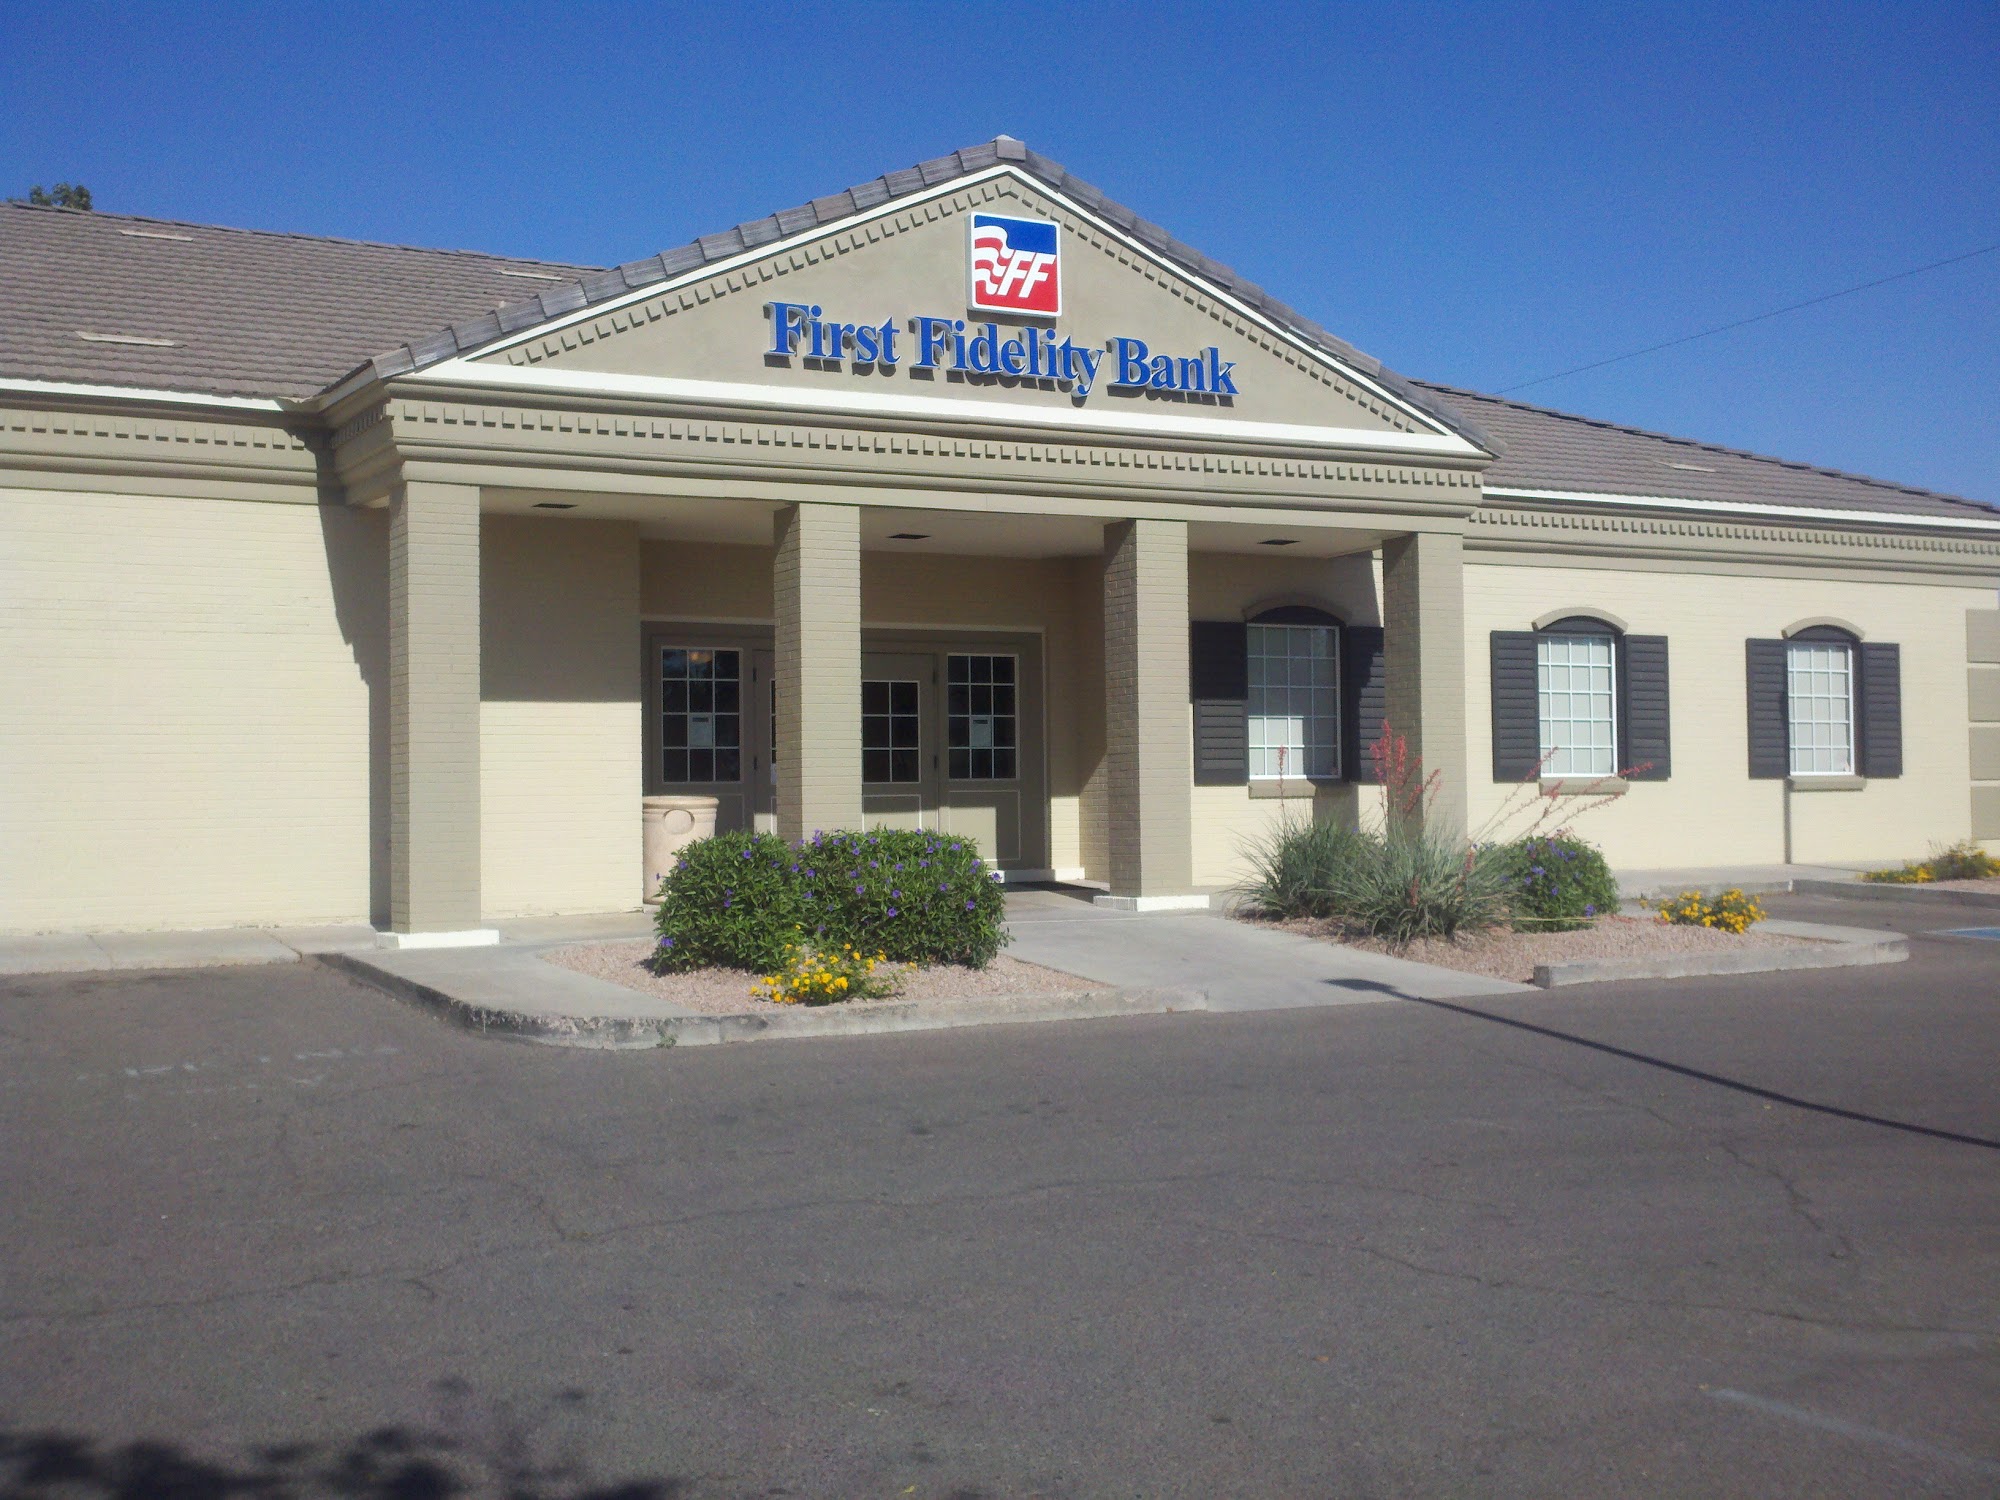 First Fidelity Bank - Old Town Scottsdale